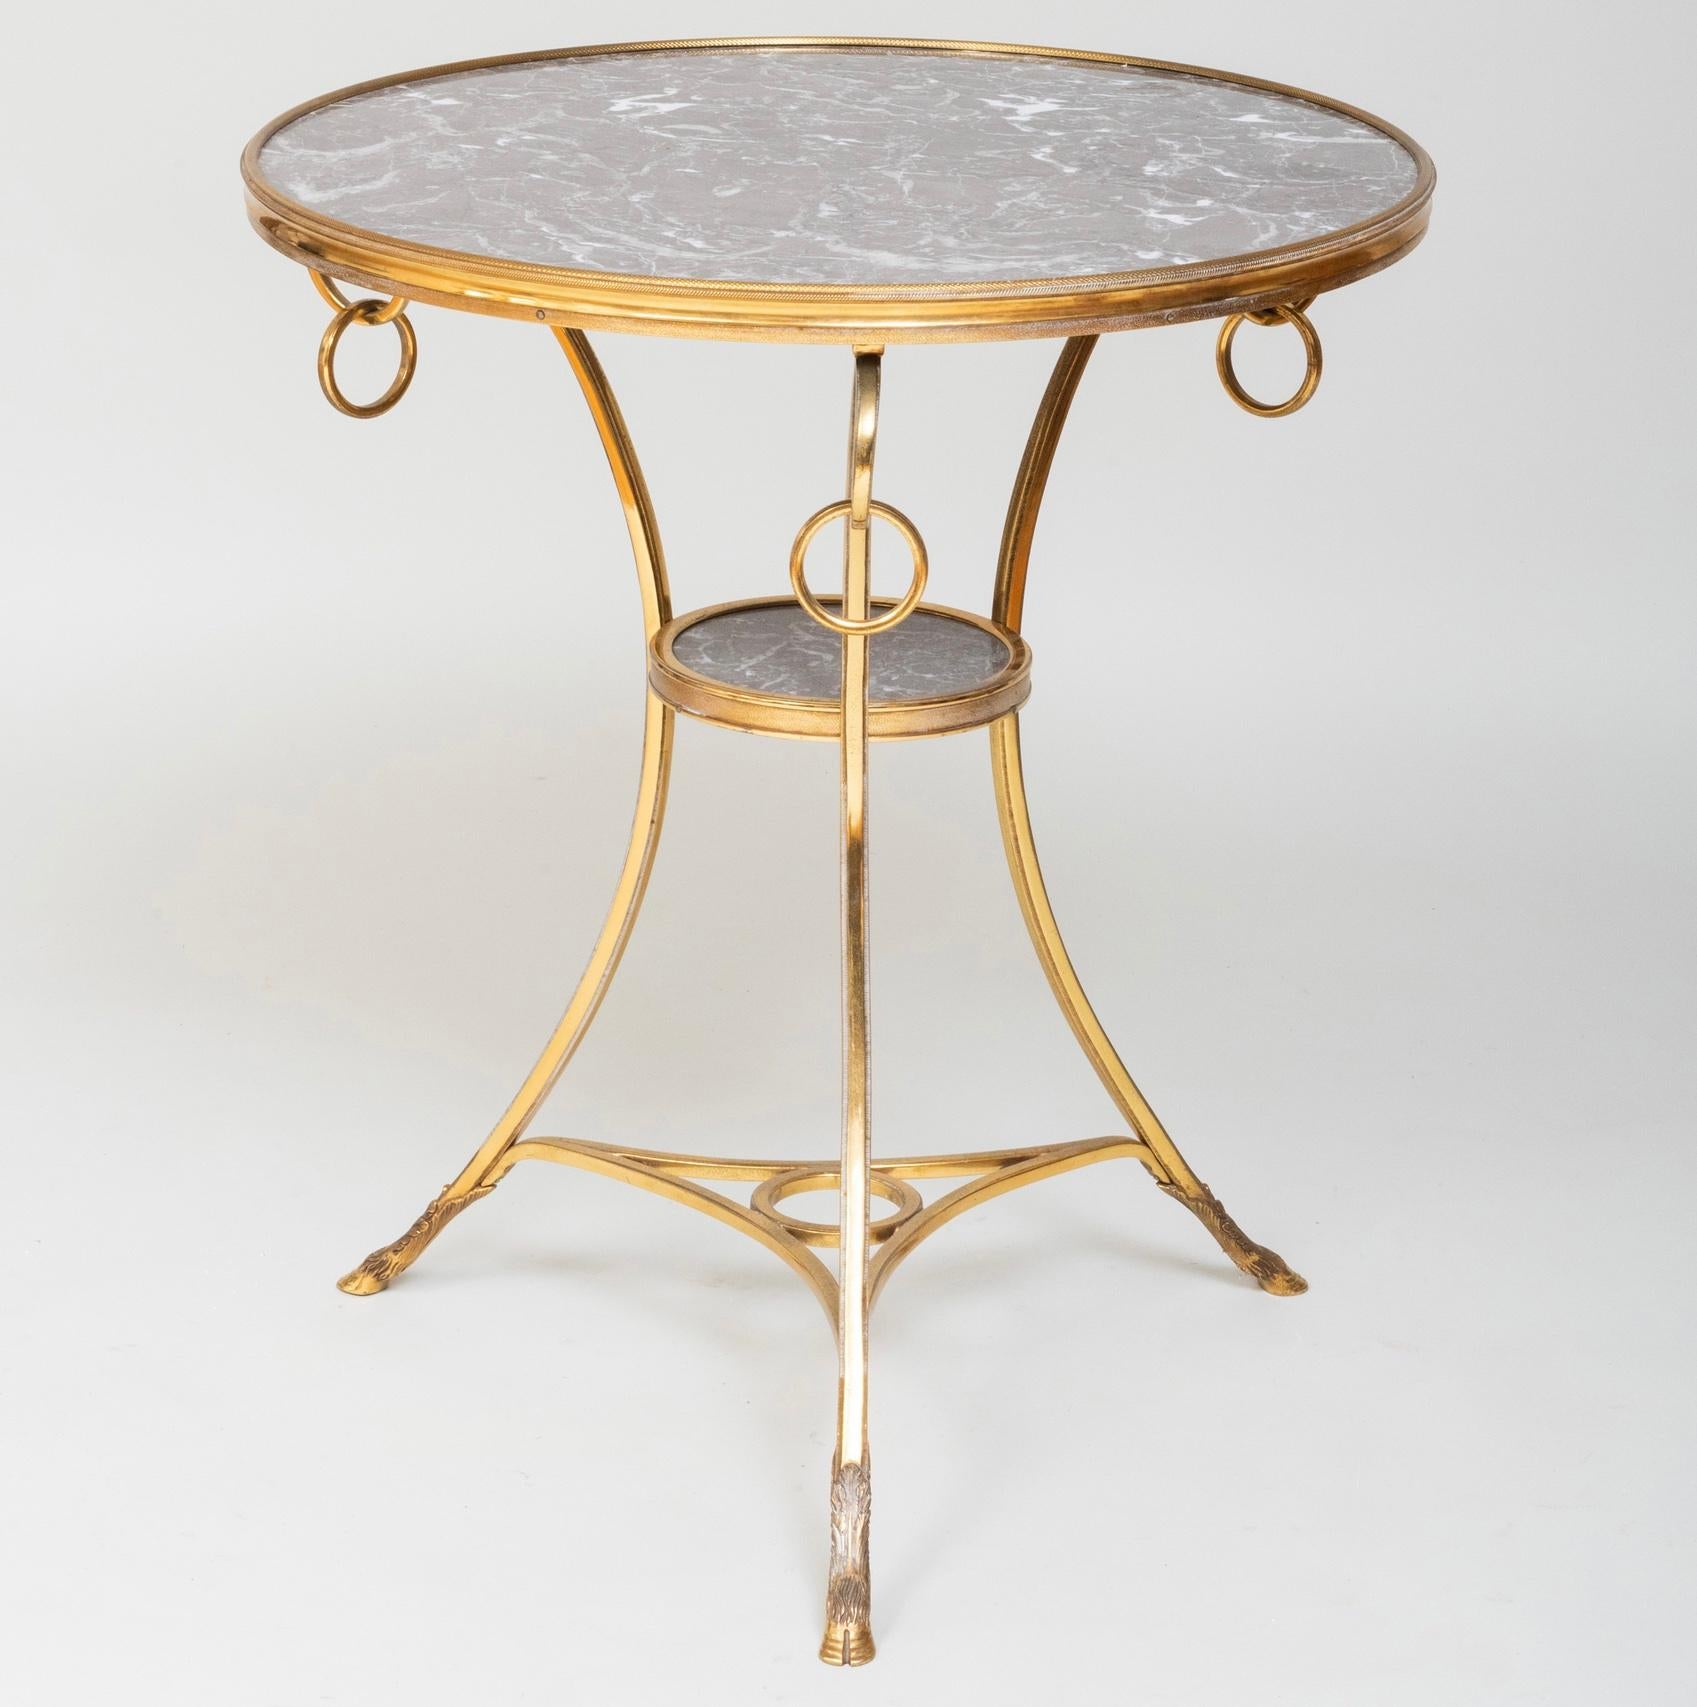 Elegant round side table with decorative rings hanging from the apron, and cloven feet. Refined details and quality.